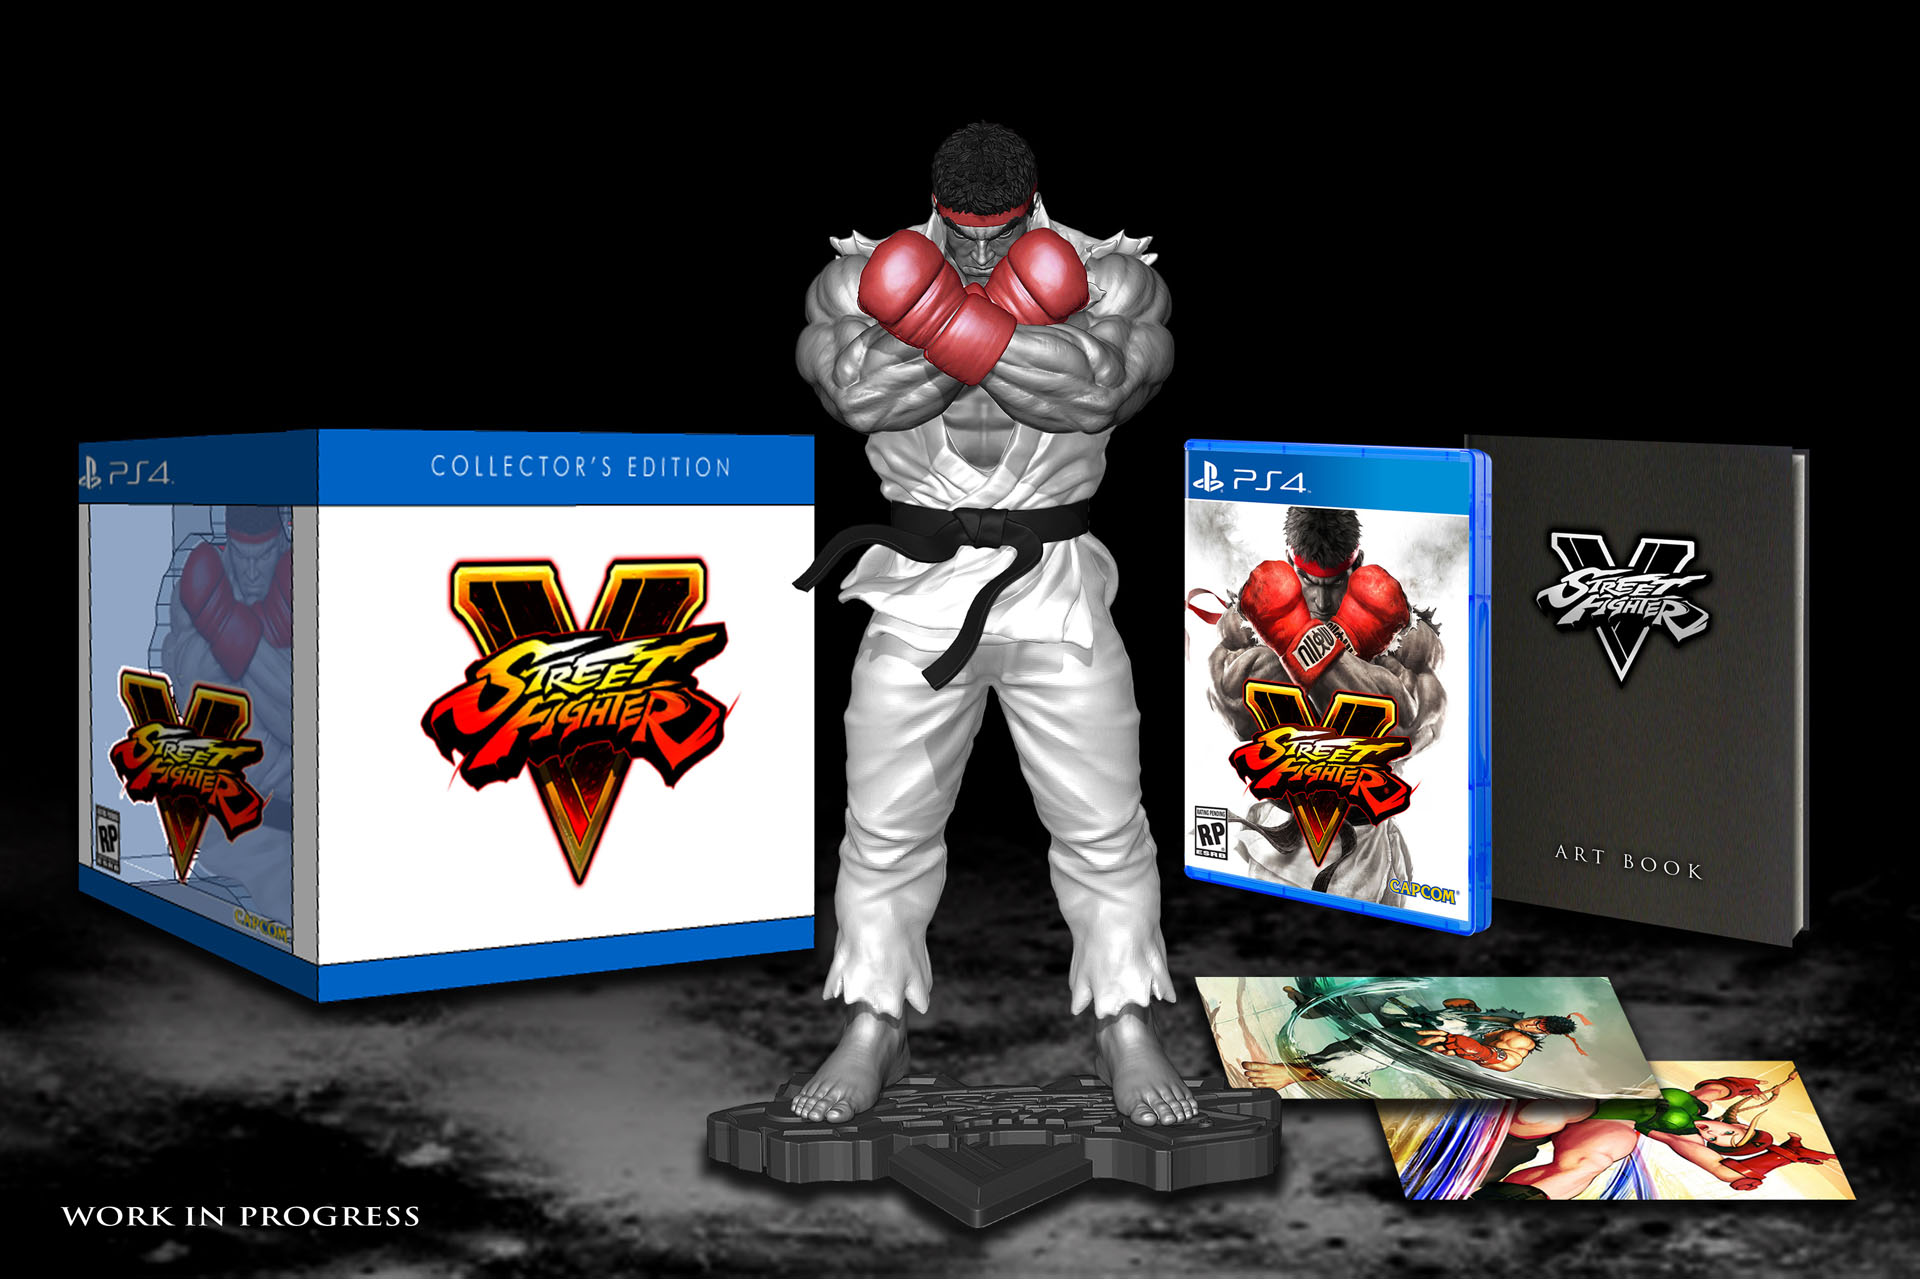 street fighter V collector's edition